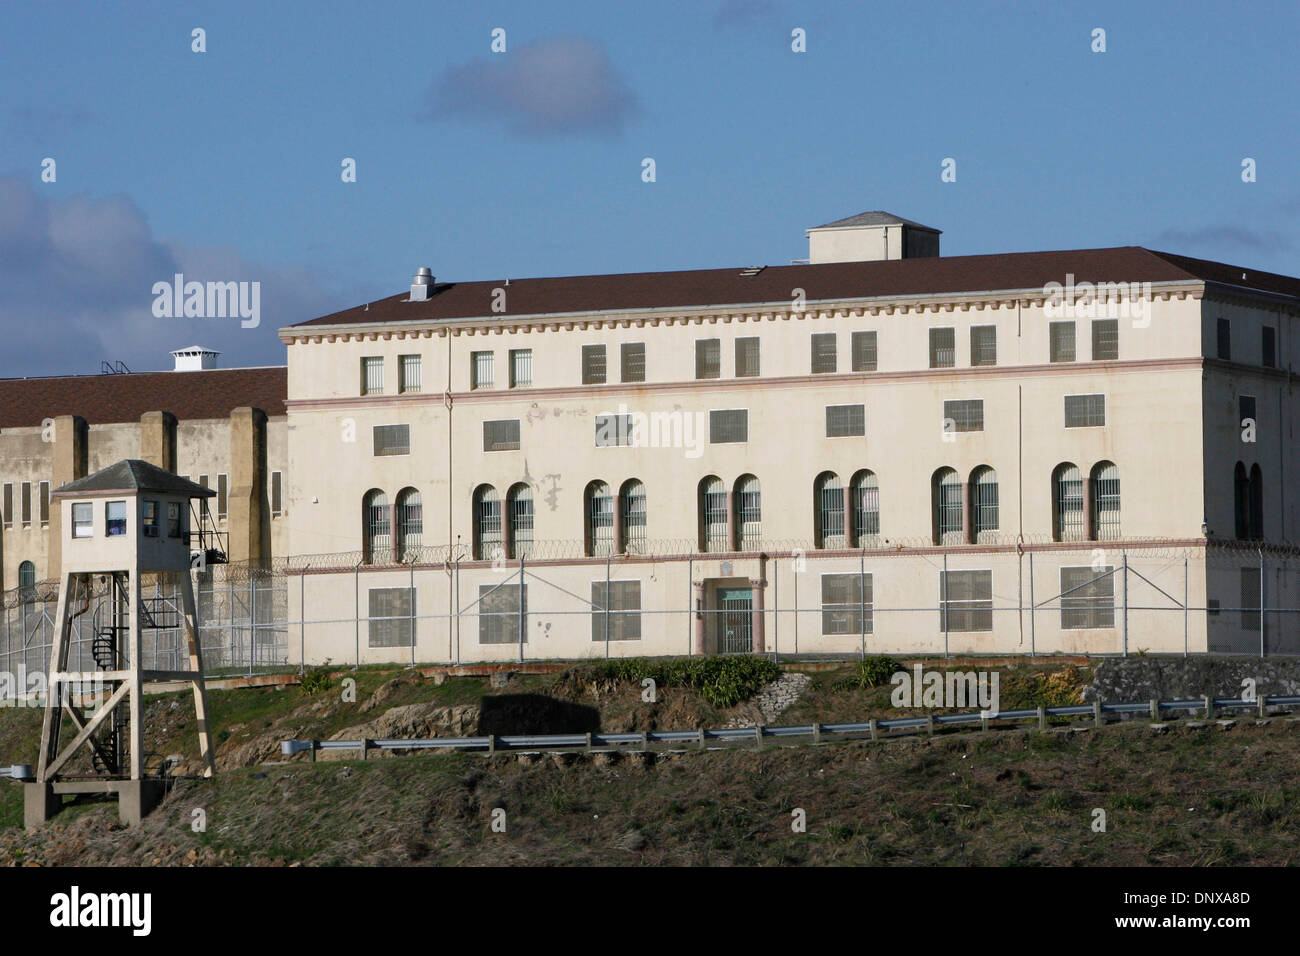 Dec 02, 2005; San Quentin, CA, USA; San Quentin Prison is California's oldest and best known correctional institution. The prison today includes a reception center for new commitments, a parole violator unit, general population units, and a minimum security work crew unit. The state's only gas chamber and death row for all male condemned inmates are located at San Quentin. Currentl Stock Photo